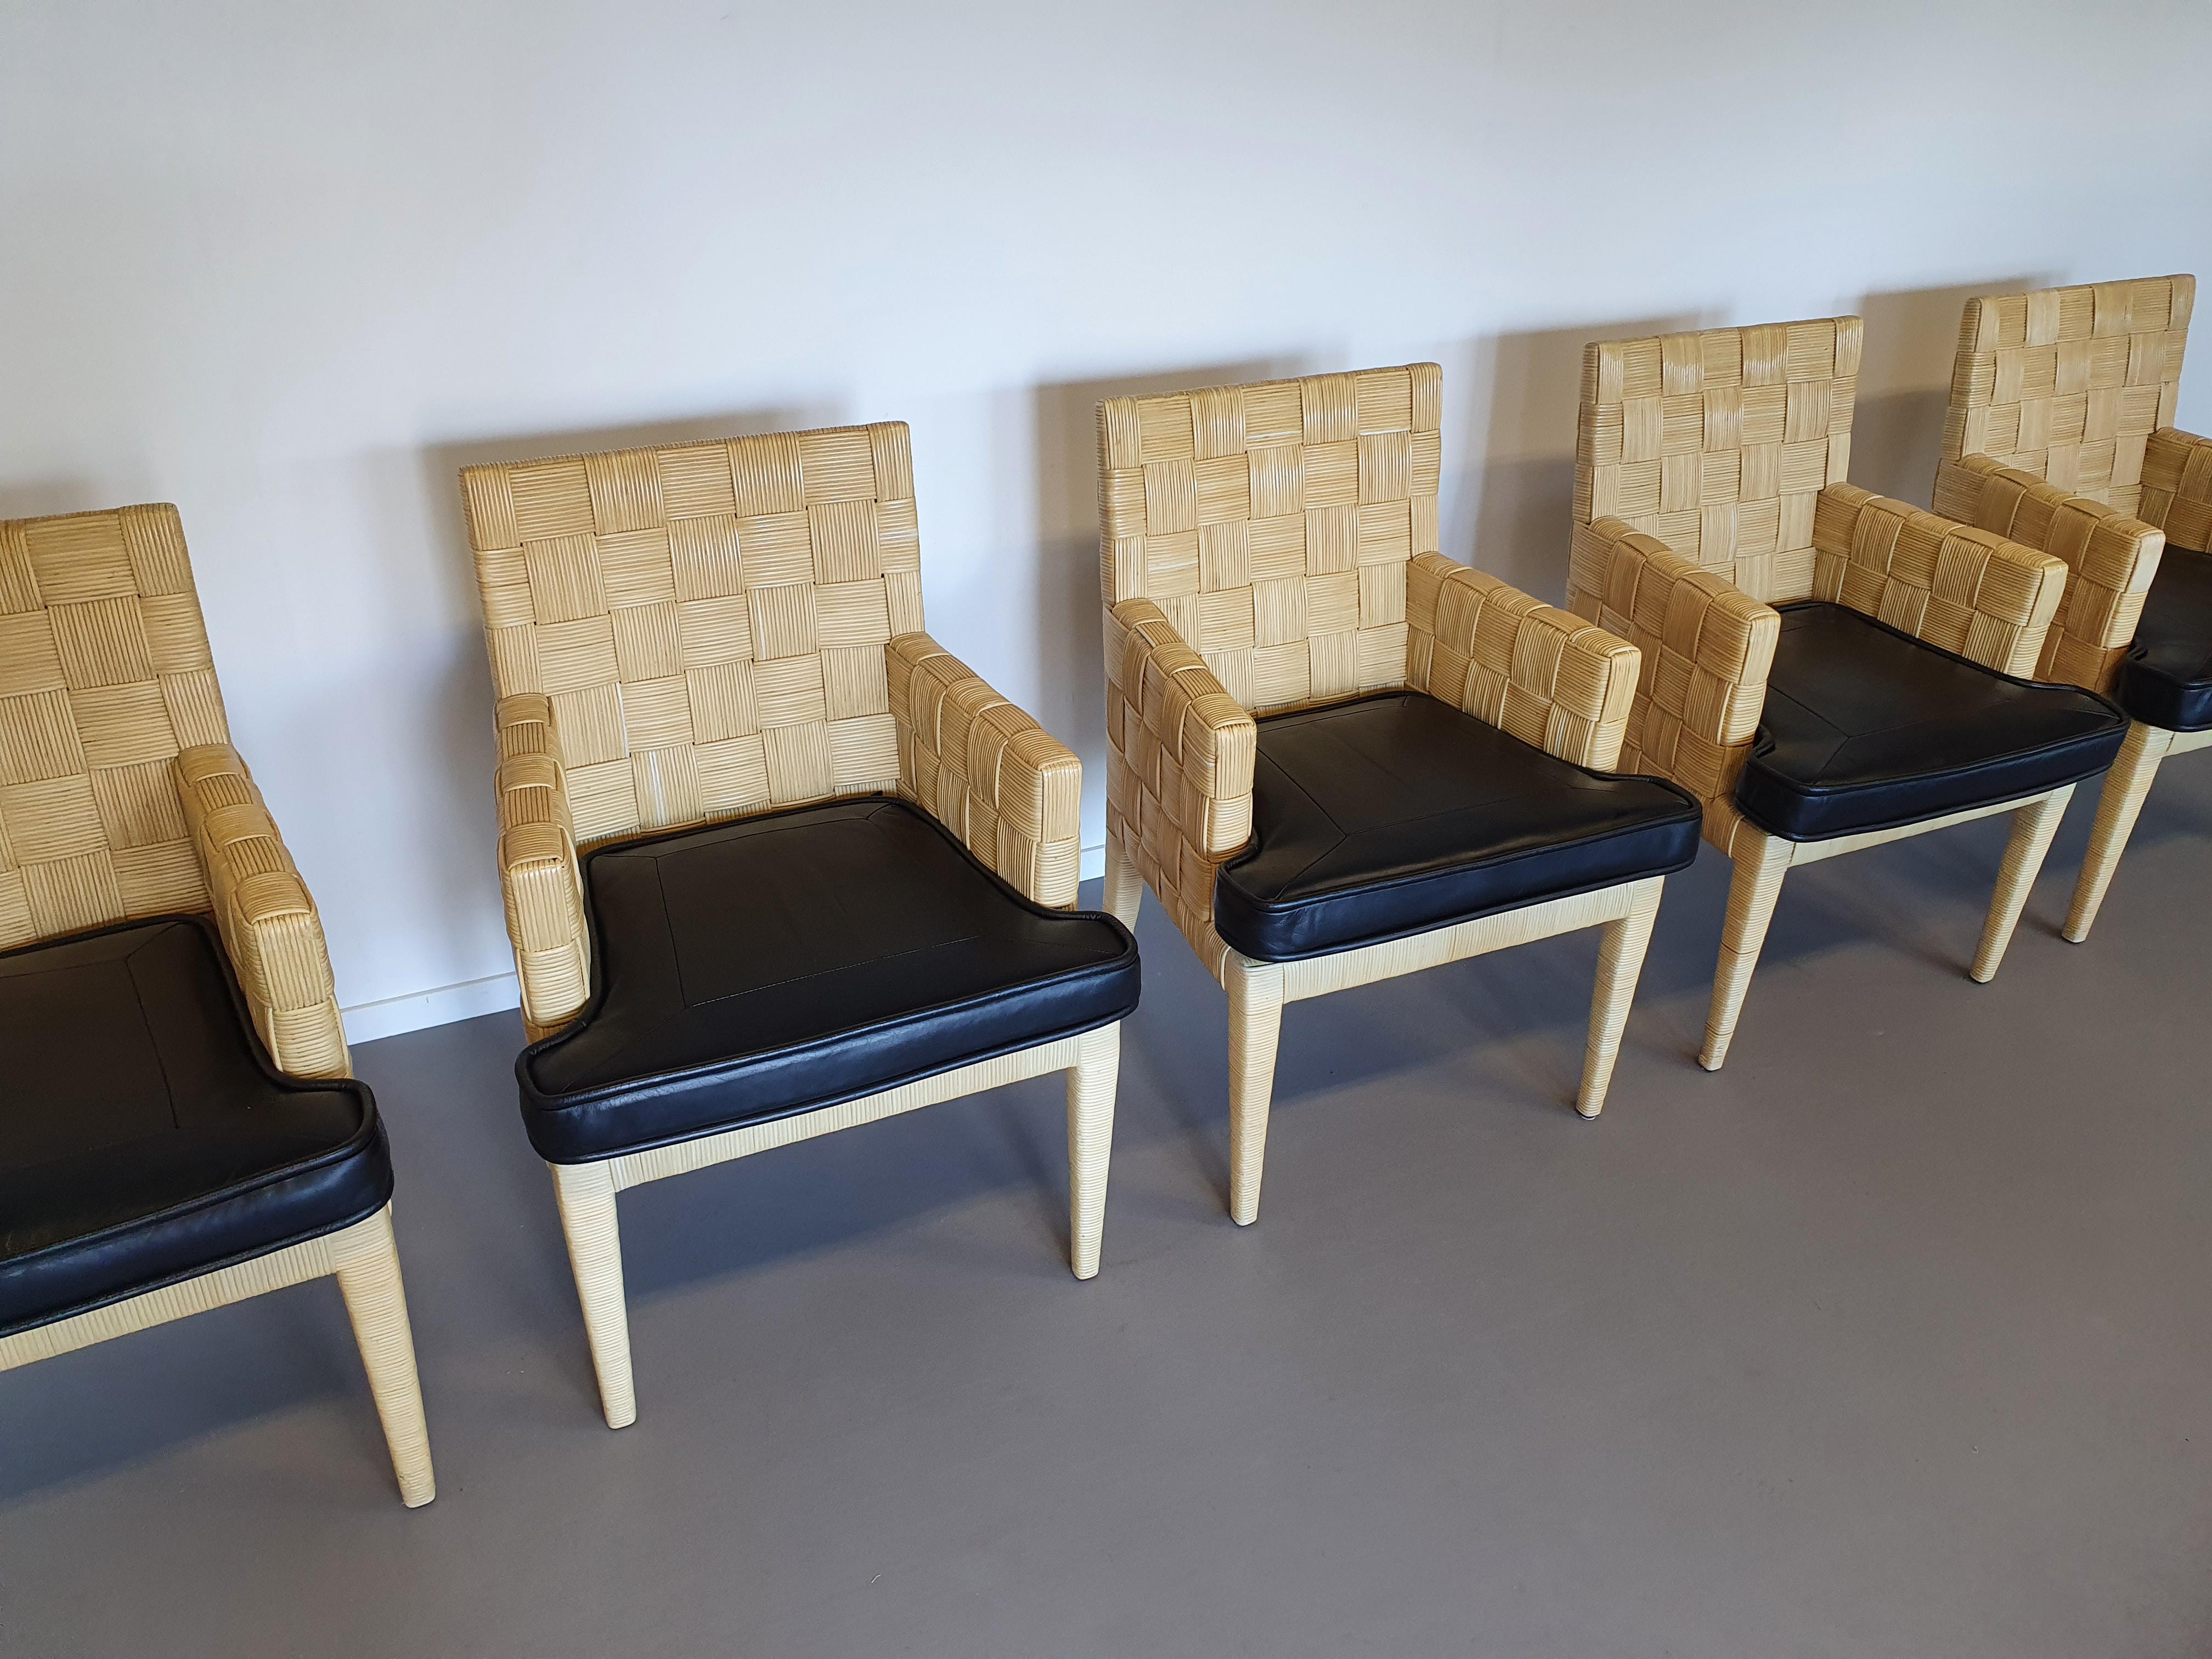 North American Donghia Block Island chairs 1990s with leather seats. 5 x armrests, 2 x without For Sale